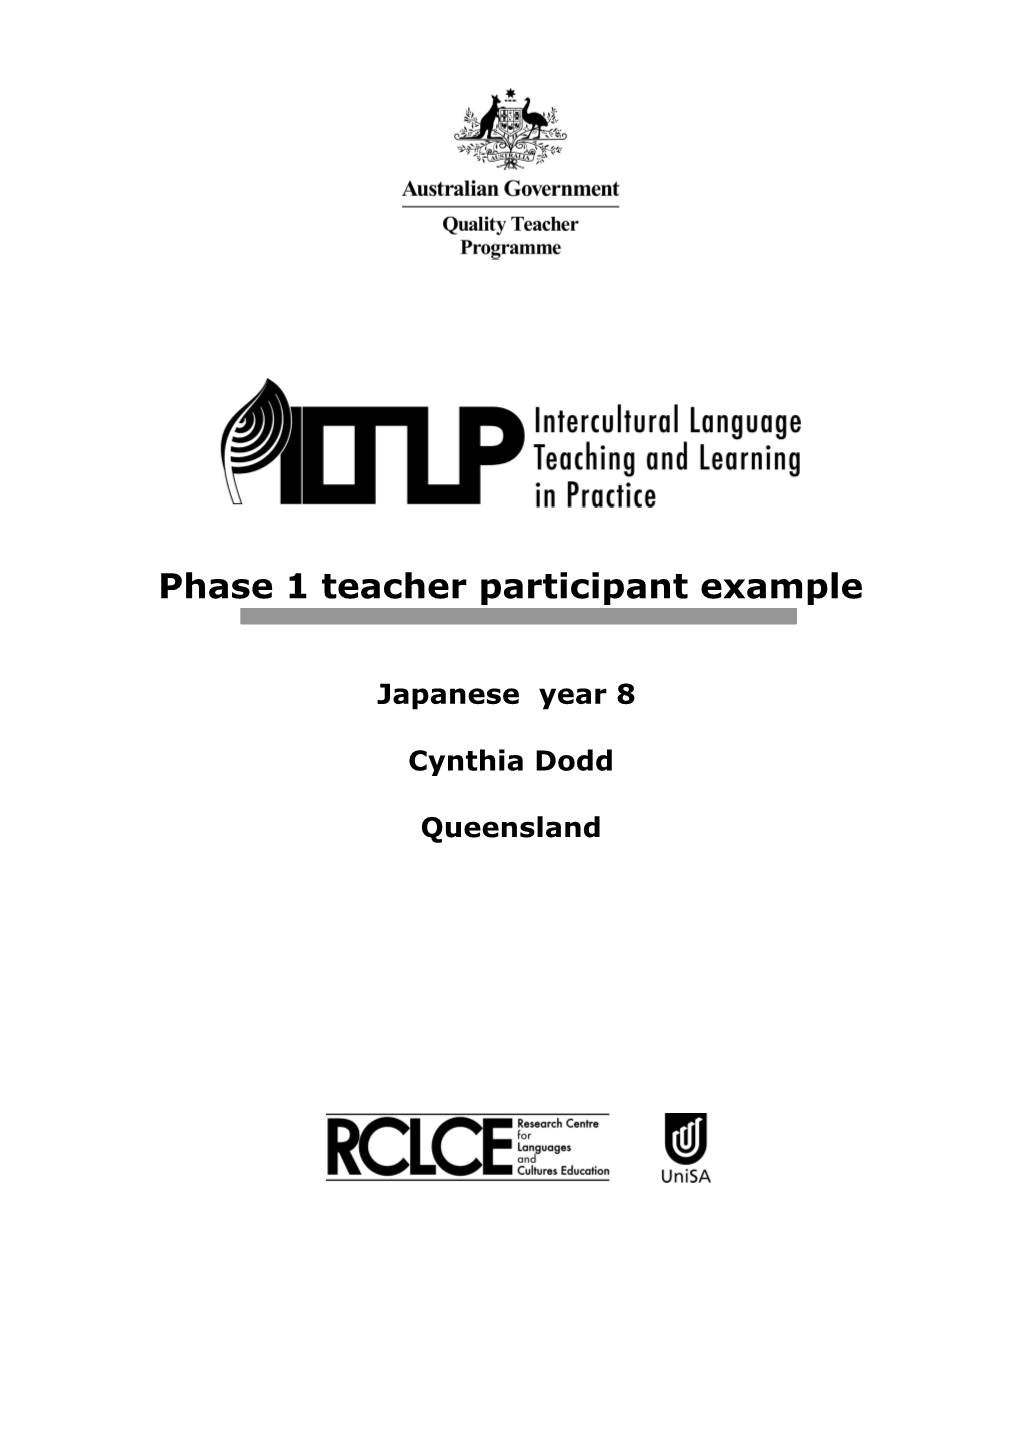 The Intercultural Language Teaching and Learning in Practice Project (ILTLP) Cynthia Dodd